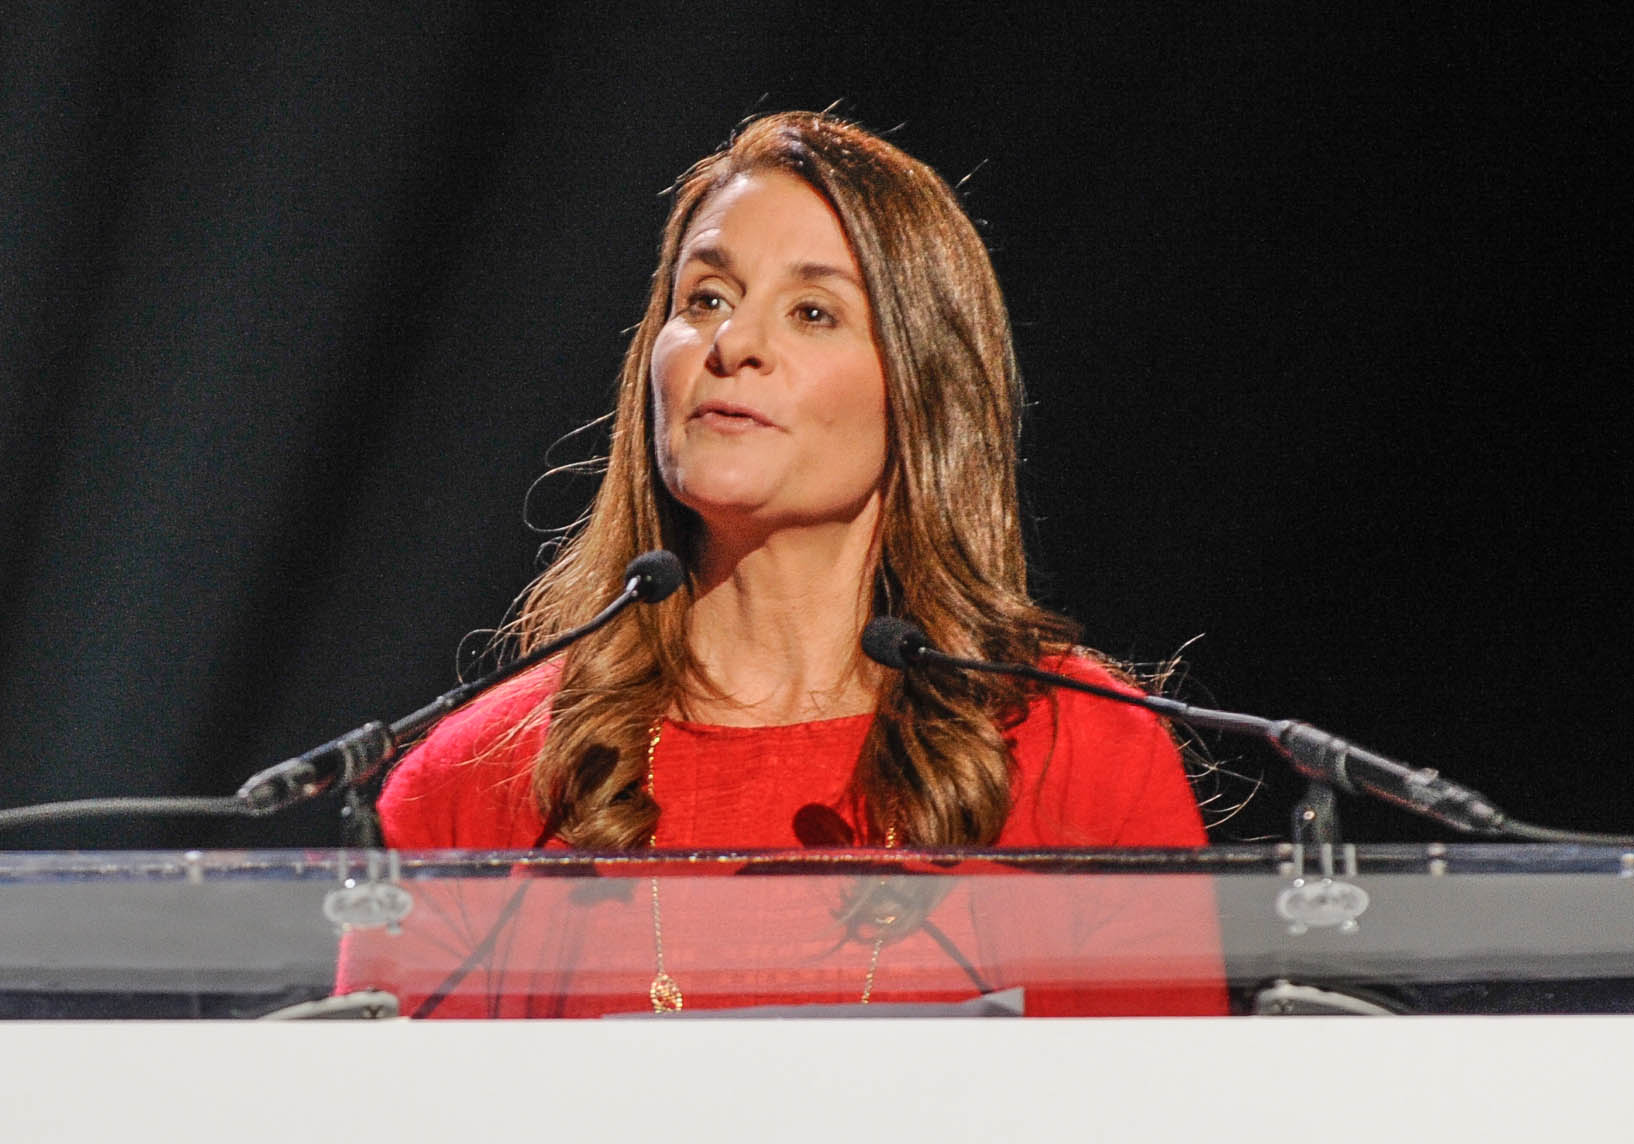 NEW YORK, NY - MARCH 10:  Melinda Gates attends Step It Up for Gender Equality Celebrates The 20th Anniversary Of The Fourth World Conference On Women In Beijing at Hammerstein Ballroom on March 10, 2015 in New York City.  (Photo by Esther Horvath/FilmMagic)/Melinda Gates, en un acto de UN Women. / GETTY